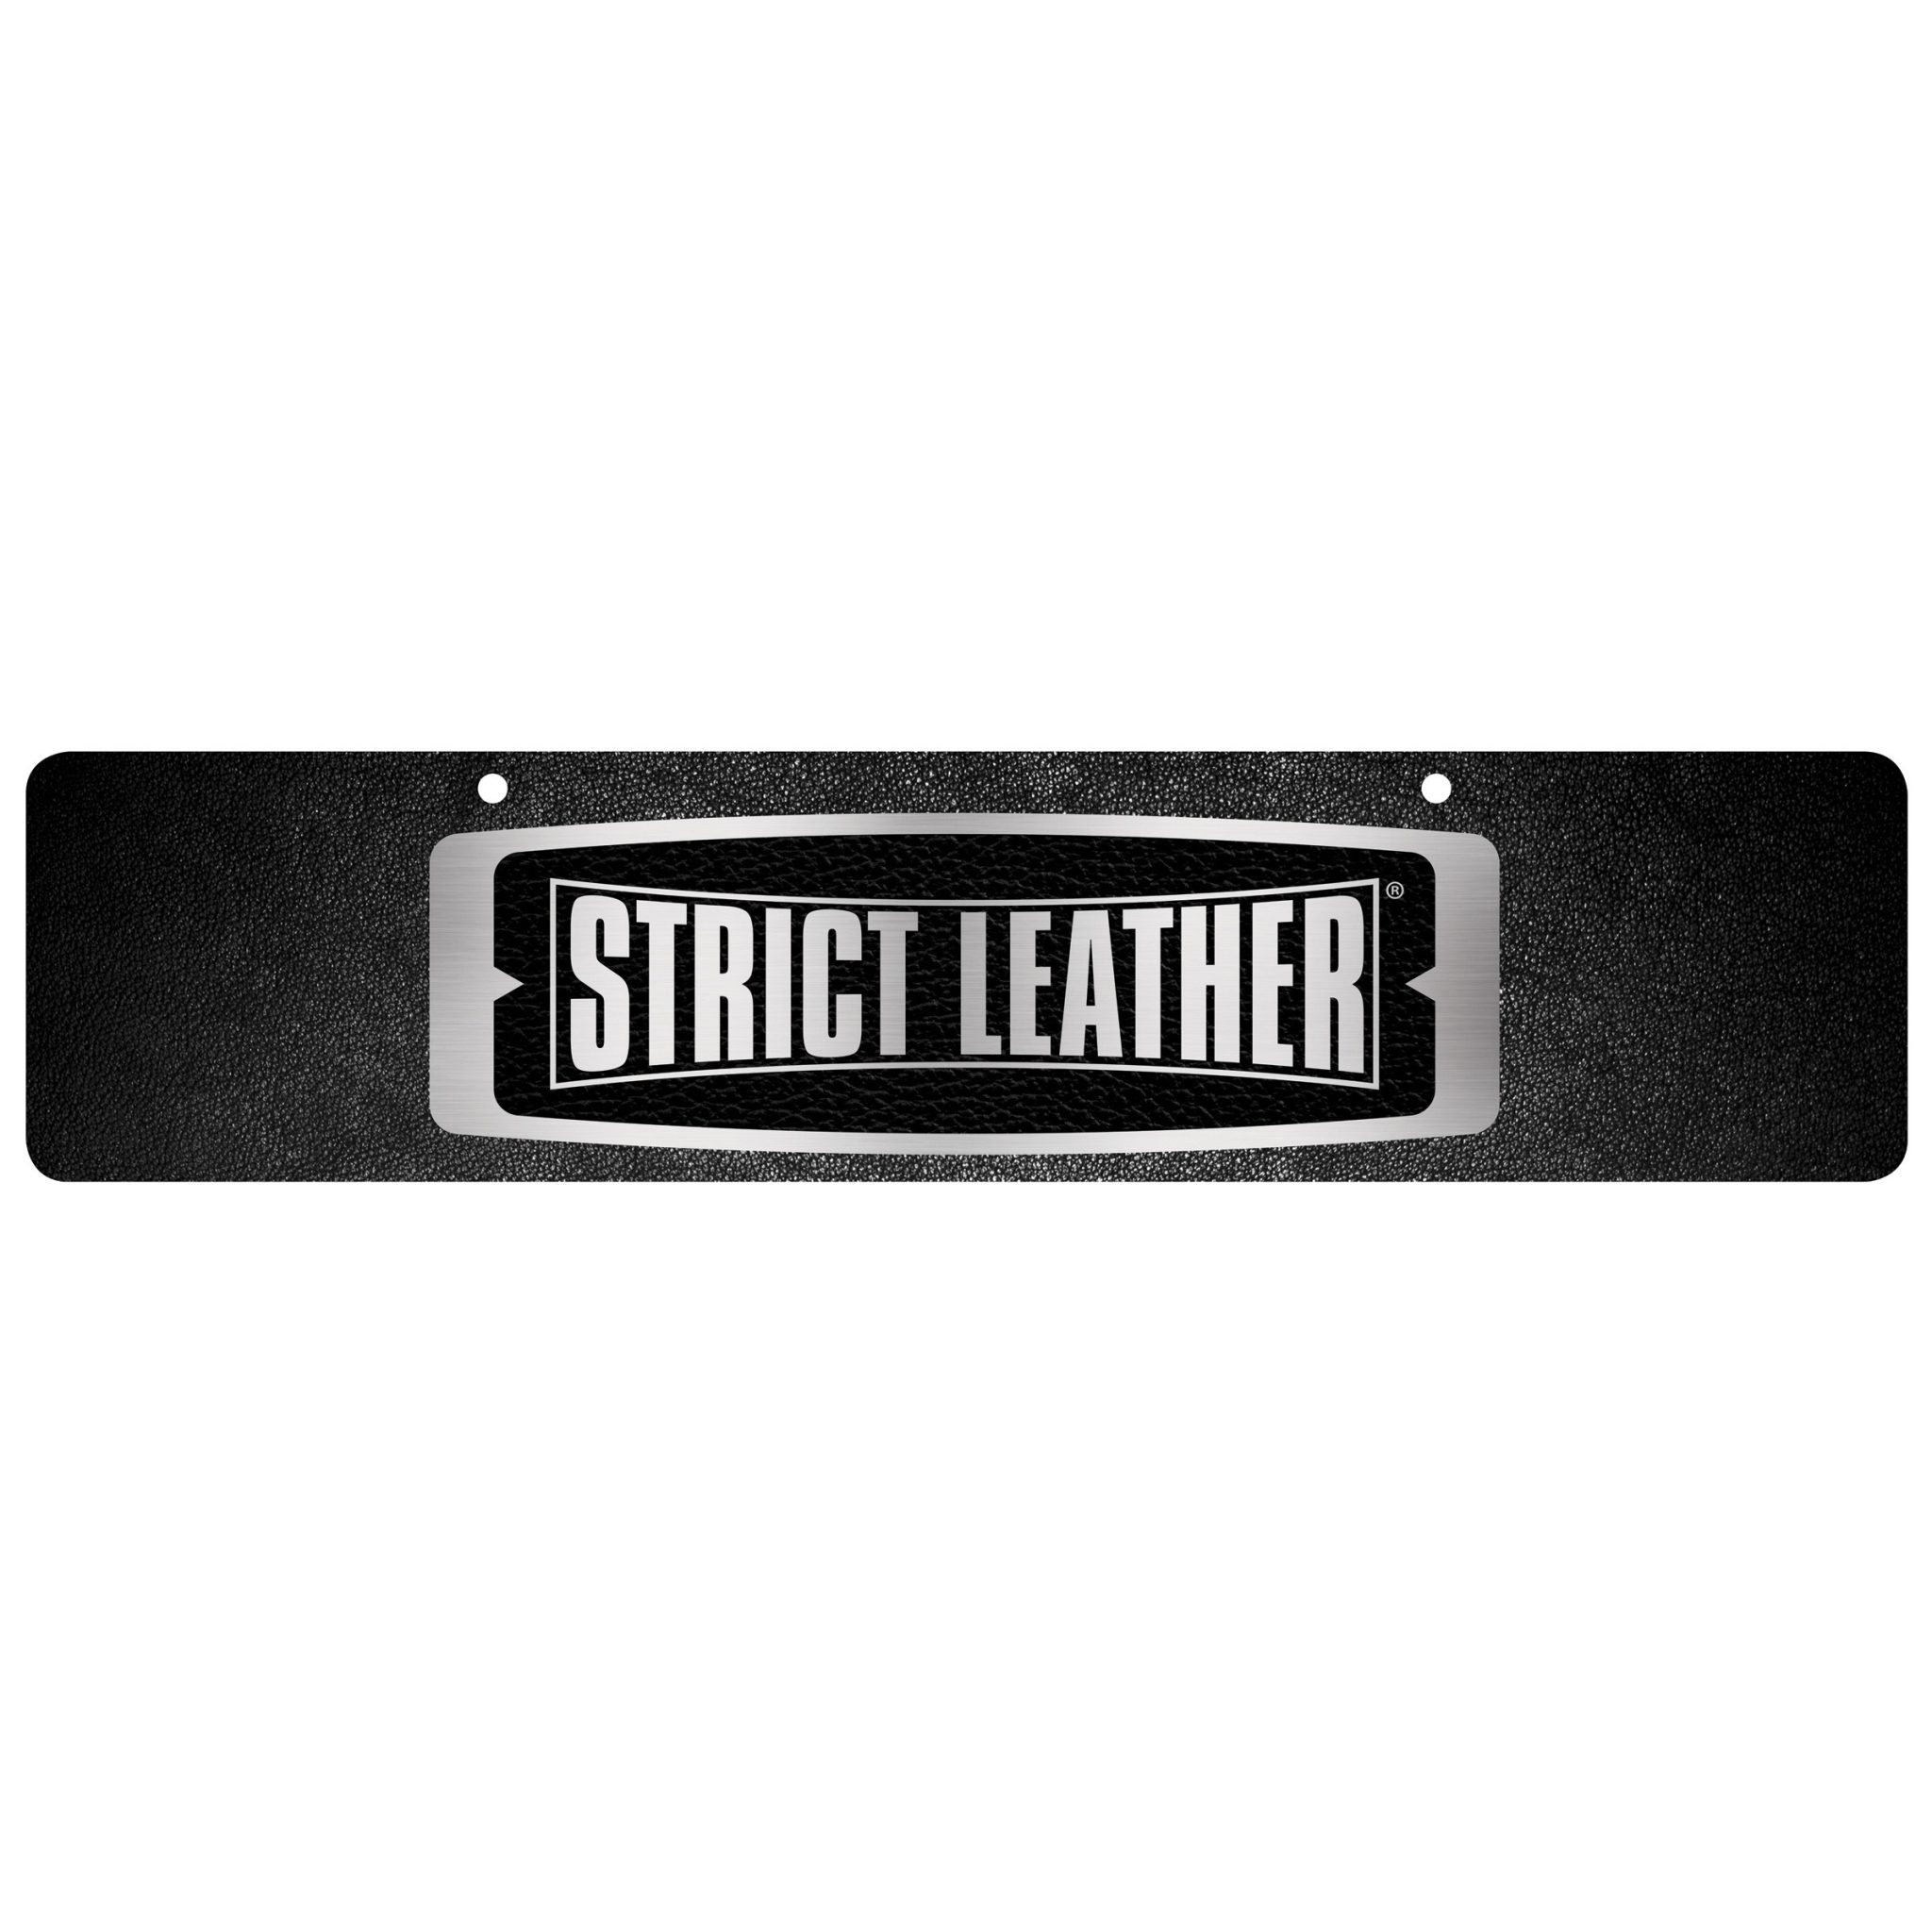 Strict Leather Display Sign